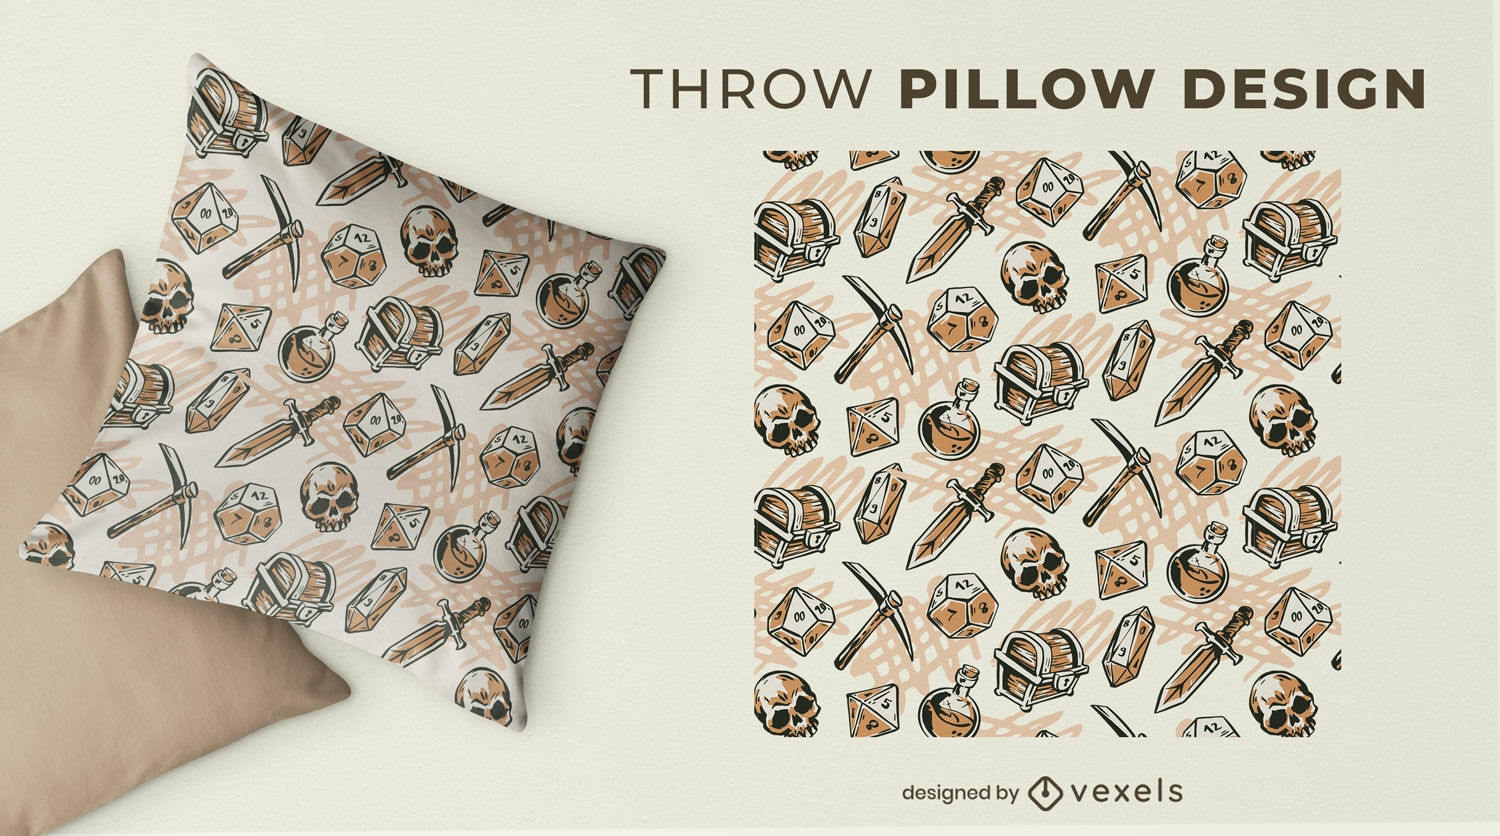 Role playing throw pillow design